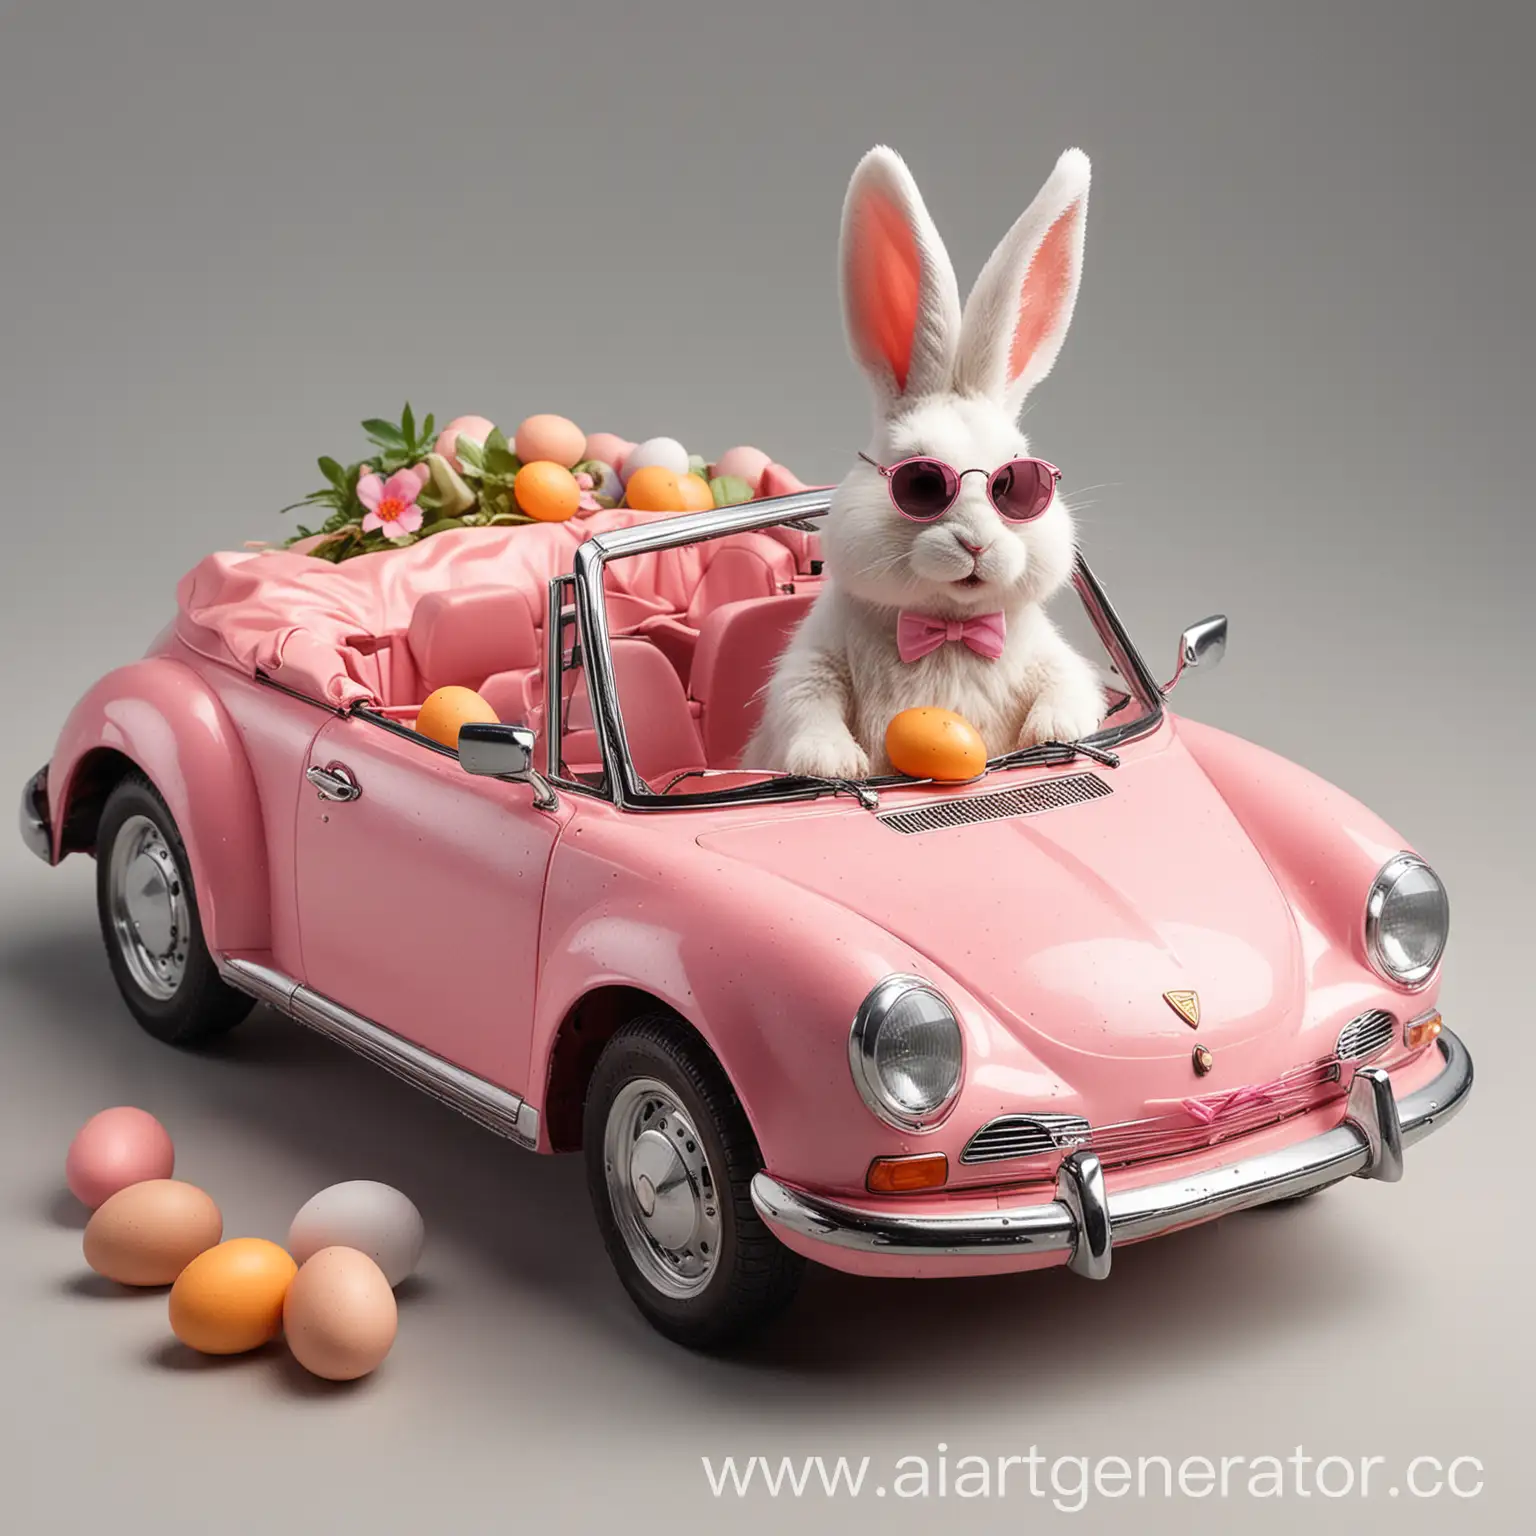 
The Easter bunny rides in a pink convertible. There are a lot of Easter eggs in the car. Everything is very nice and spring-like.
There are a lot of eggs, they almost fall out. A rabbit in sunglasses.
The whole composition is on a clean background.
The convertible is shown in full, the rabbit is big. Studio photo on a white background.
The view in the profile. The car is shown in full, the eggs are in the car